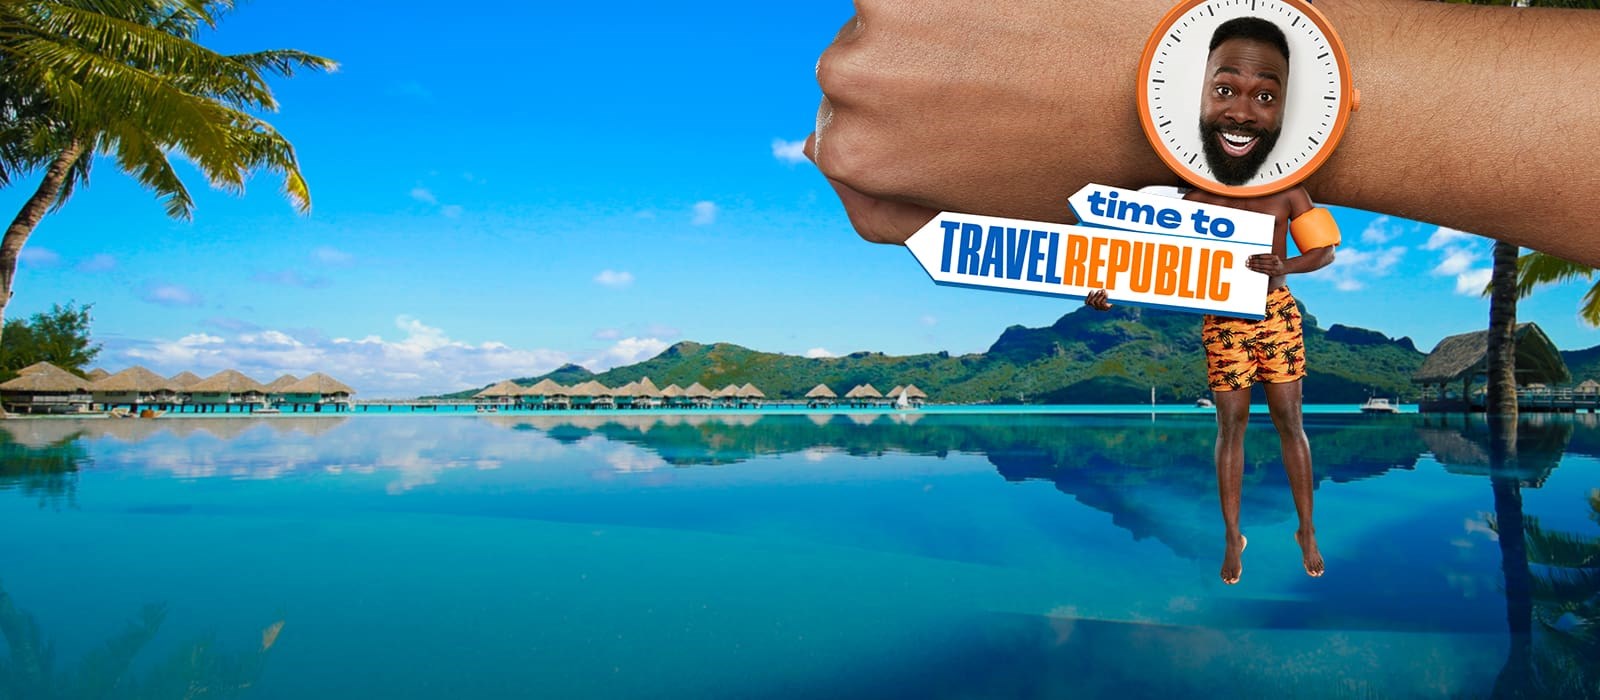 is travel republic a package holiday